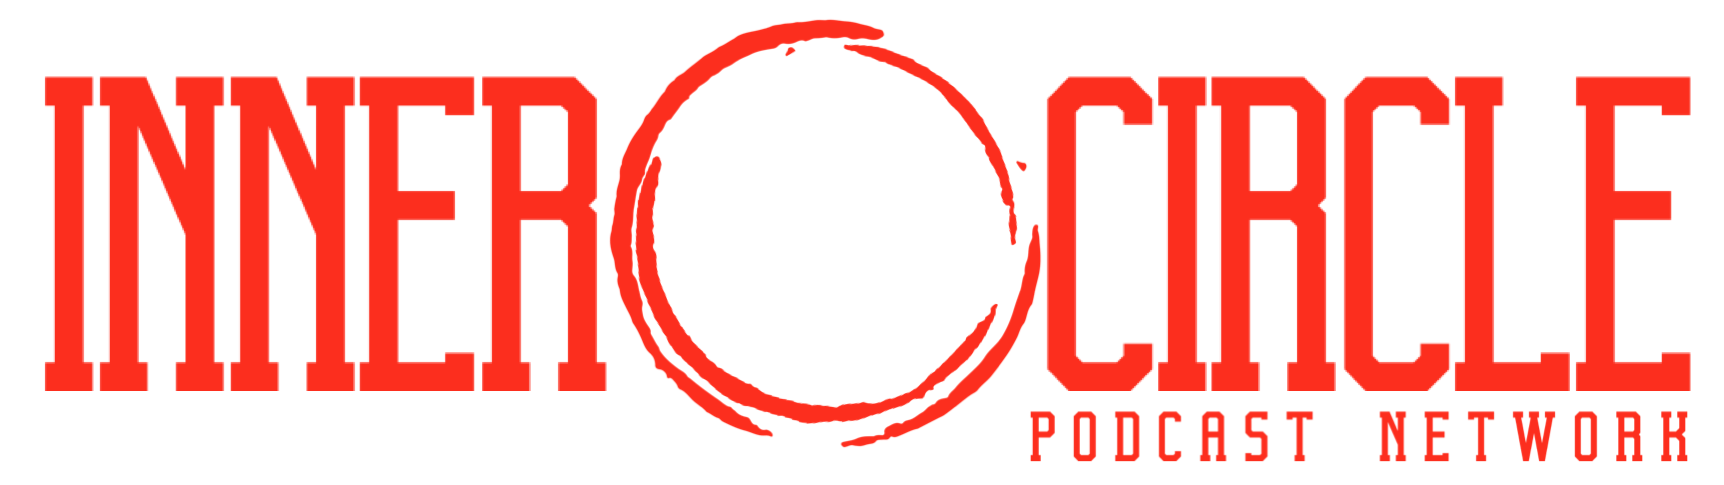 The Inner Circle Podcast Network